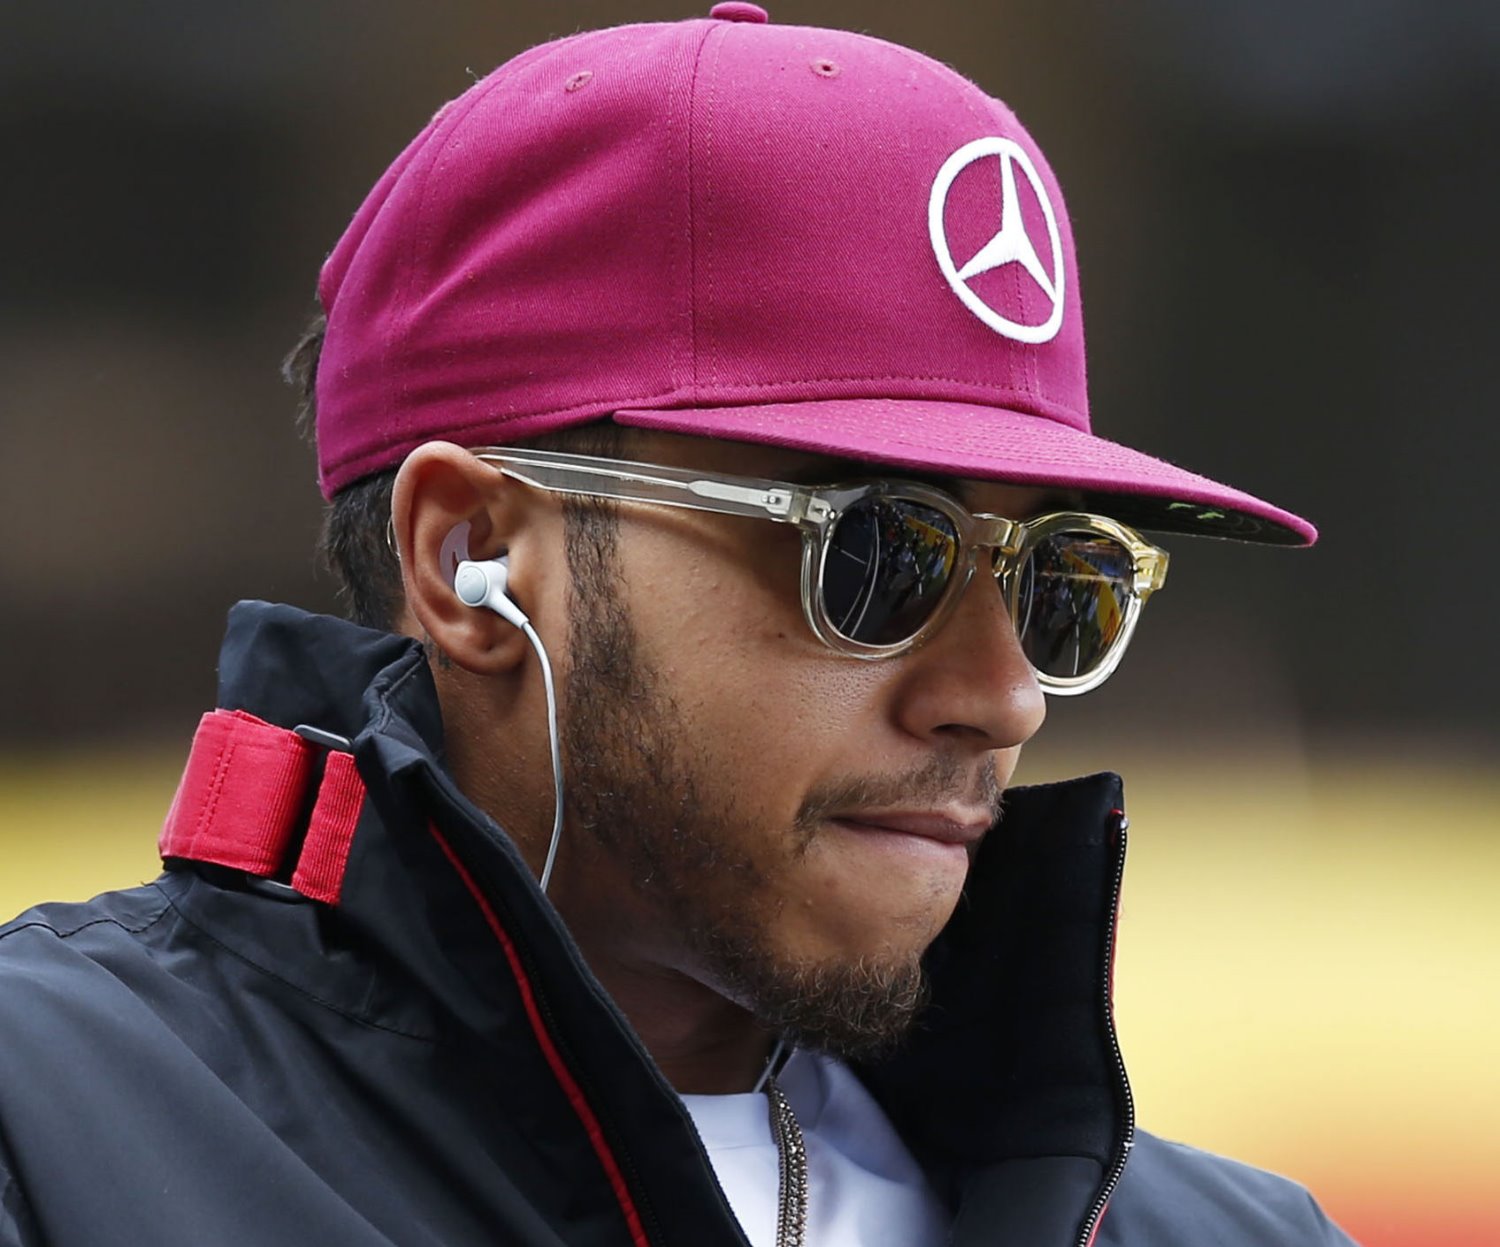 Hamilton would be nuts to leave the best team in F1